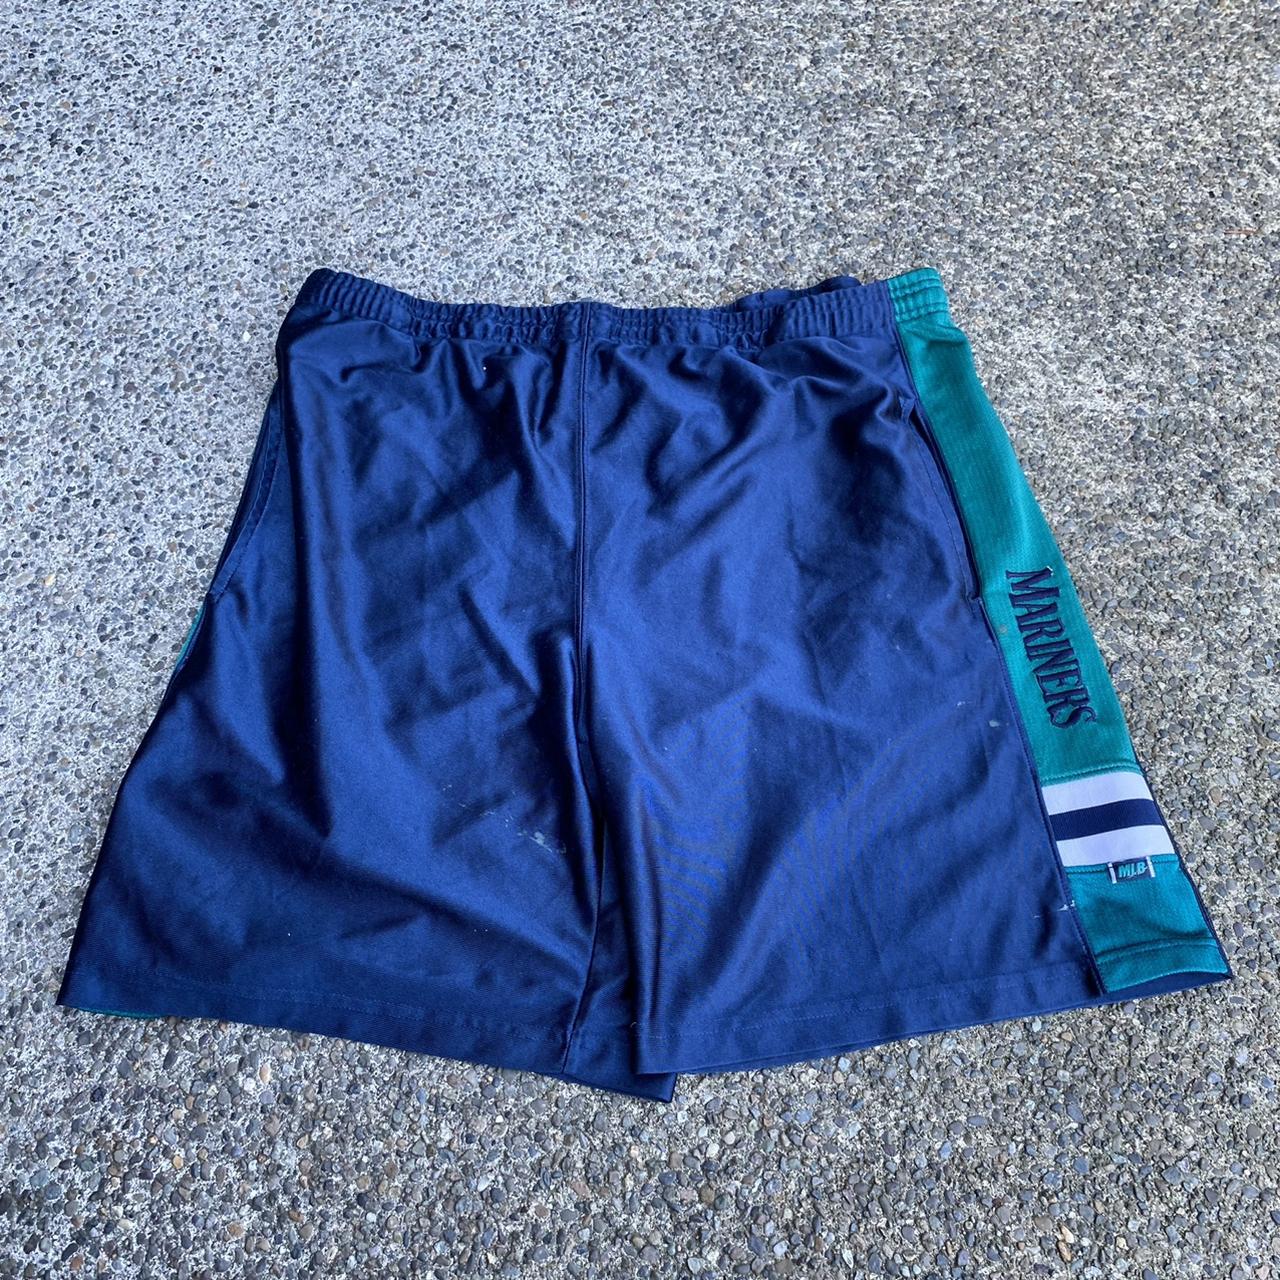 Seattle Mariners shorts | Waist is 34”, outseam is... - Depop